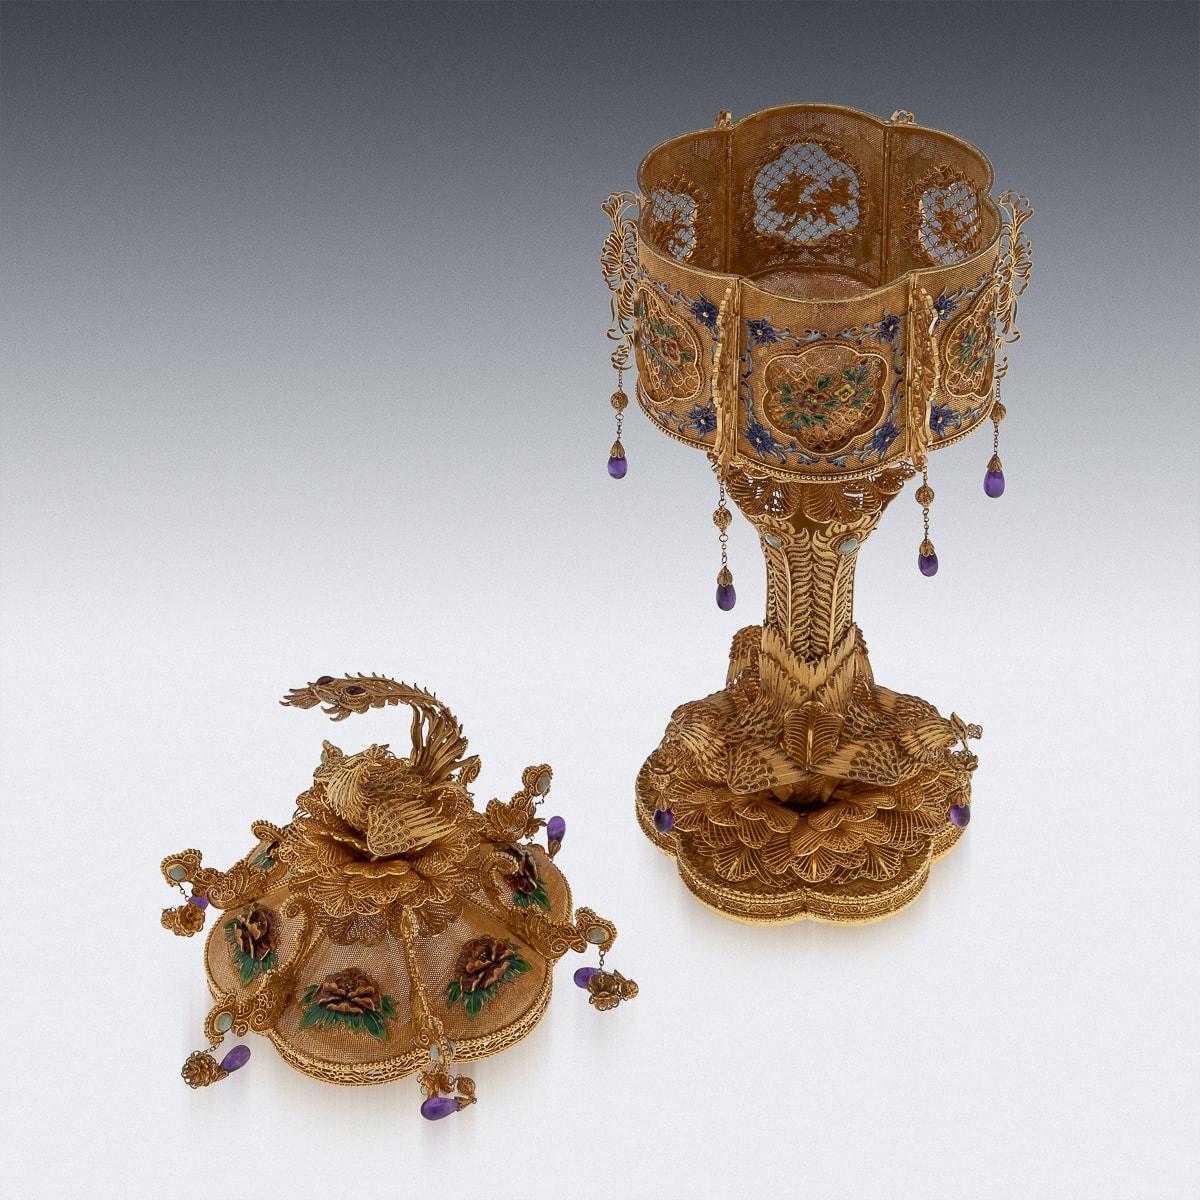 Stunning 20thC Chinese Export Solid Silver Filigree Gem Set Cup & Cover c.1950 For Sale 1